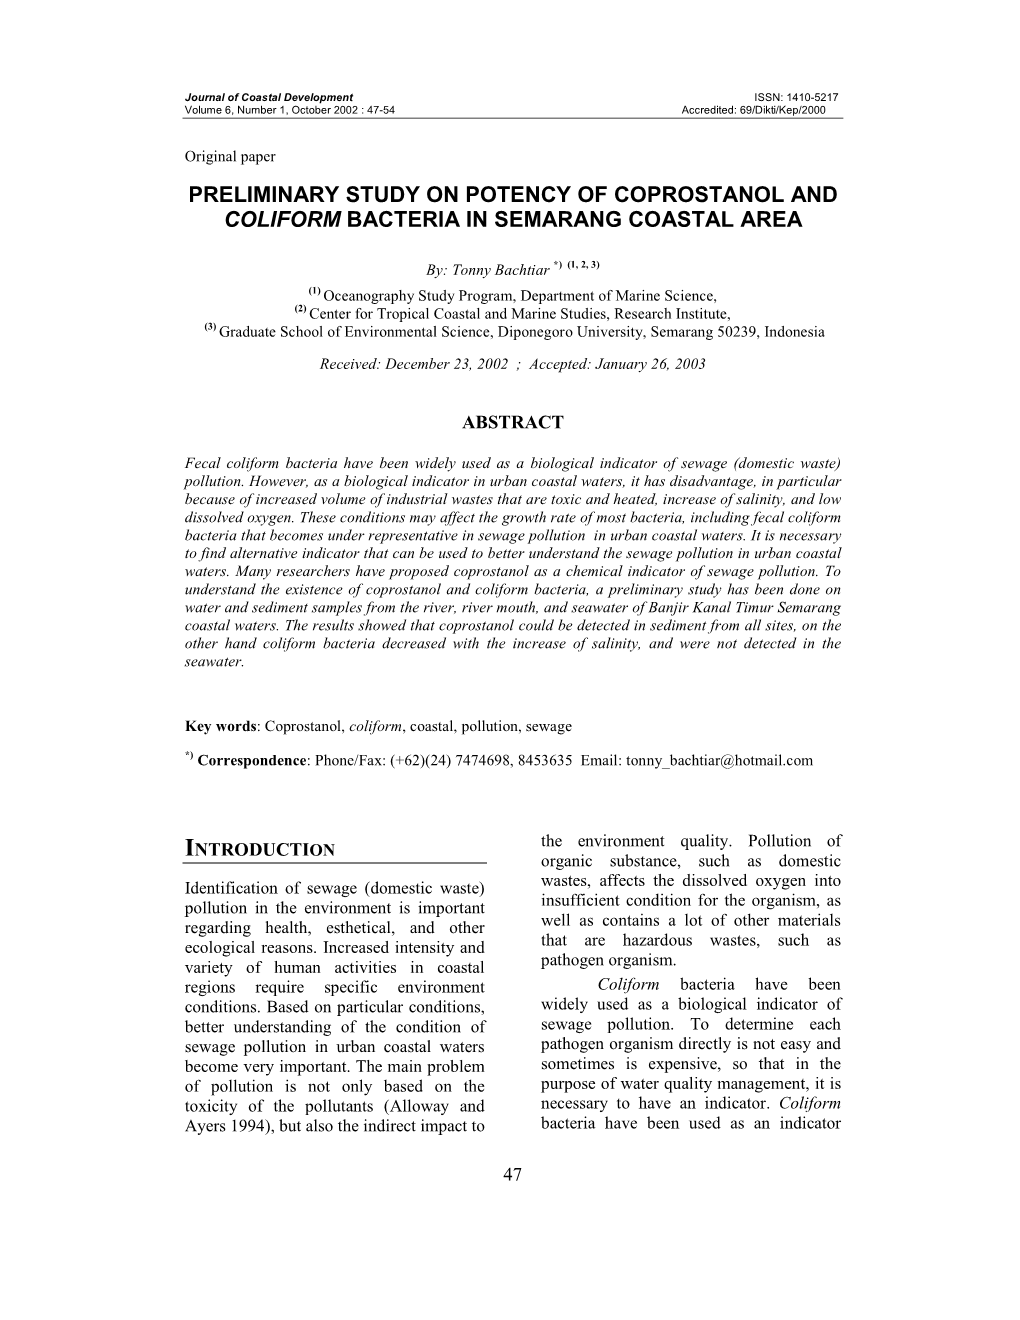 Preliminary Study on Potency of Coprostanol and Coliform Bacteria in Semarang Coastal Area